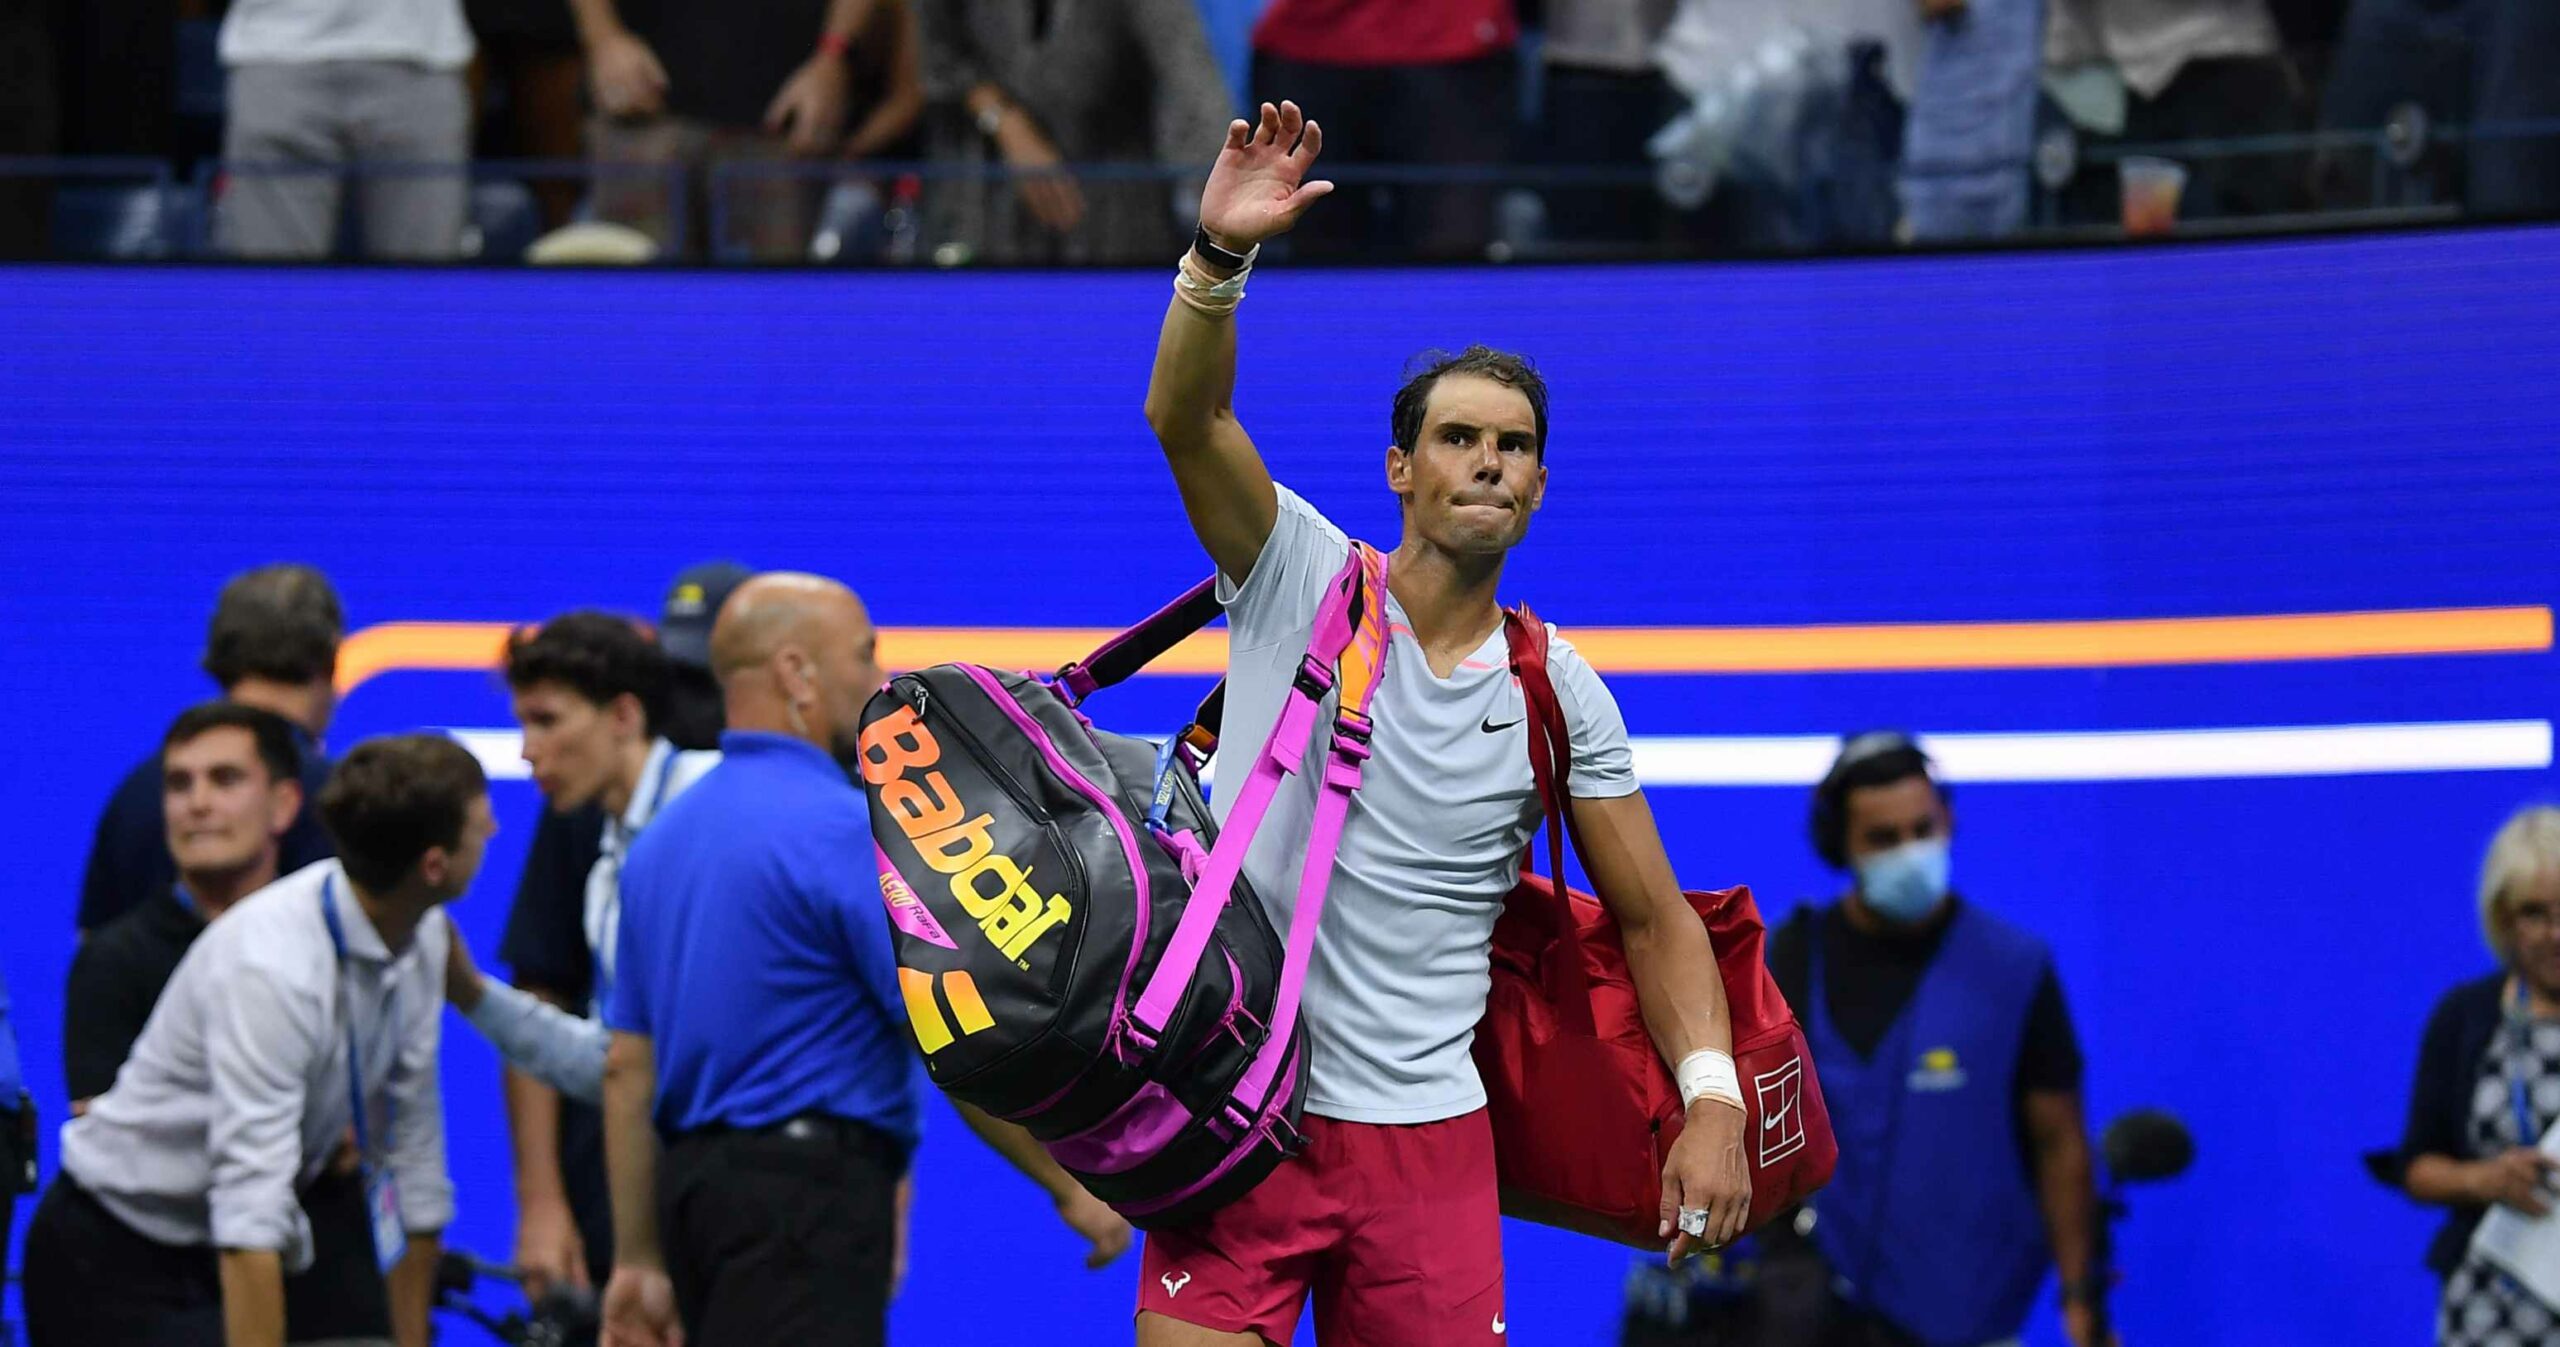 Rafael Nadal says goodbye to the crowd after his defeat against Frances Tiafoes at the US Open in 2022